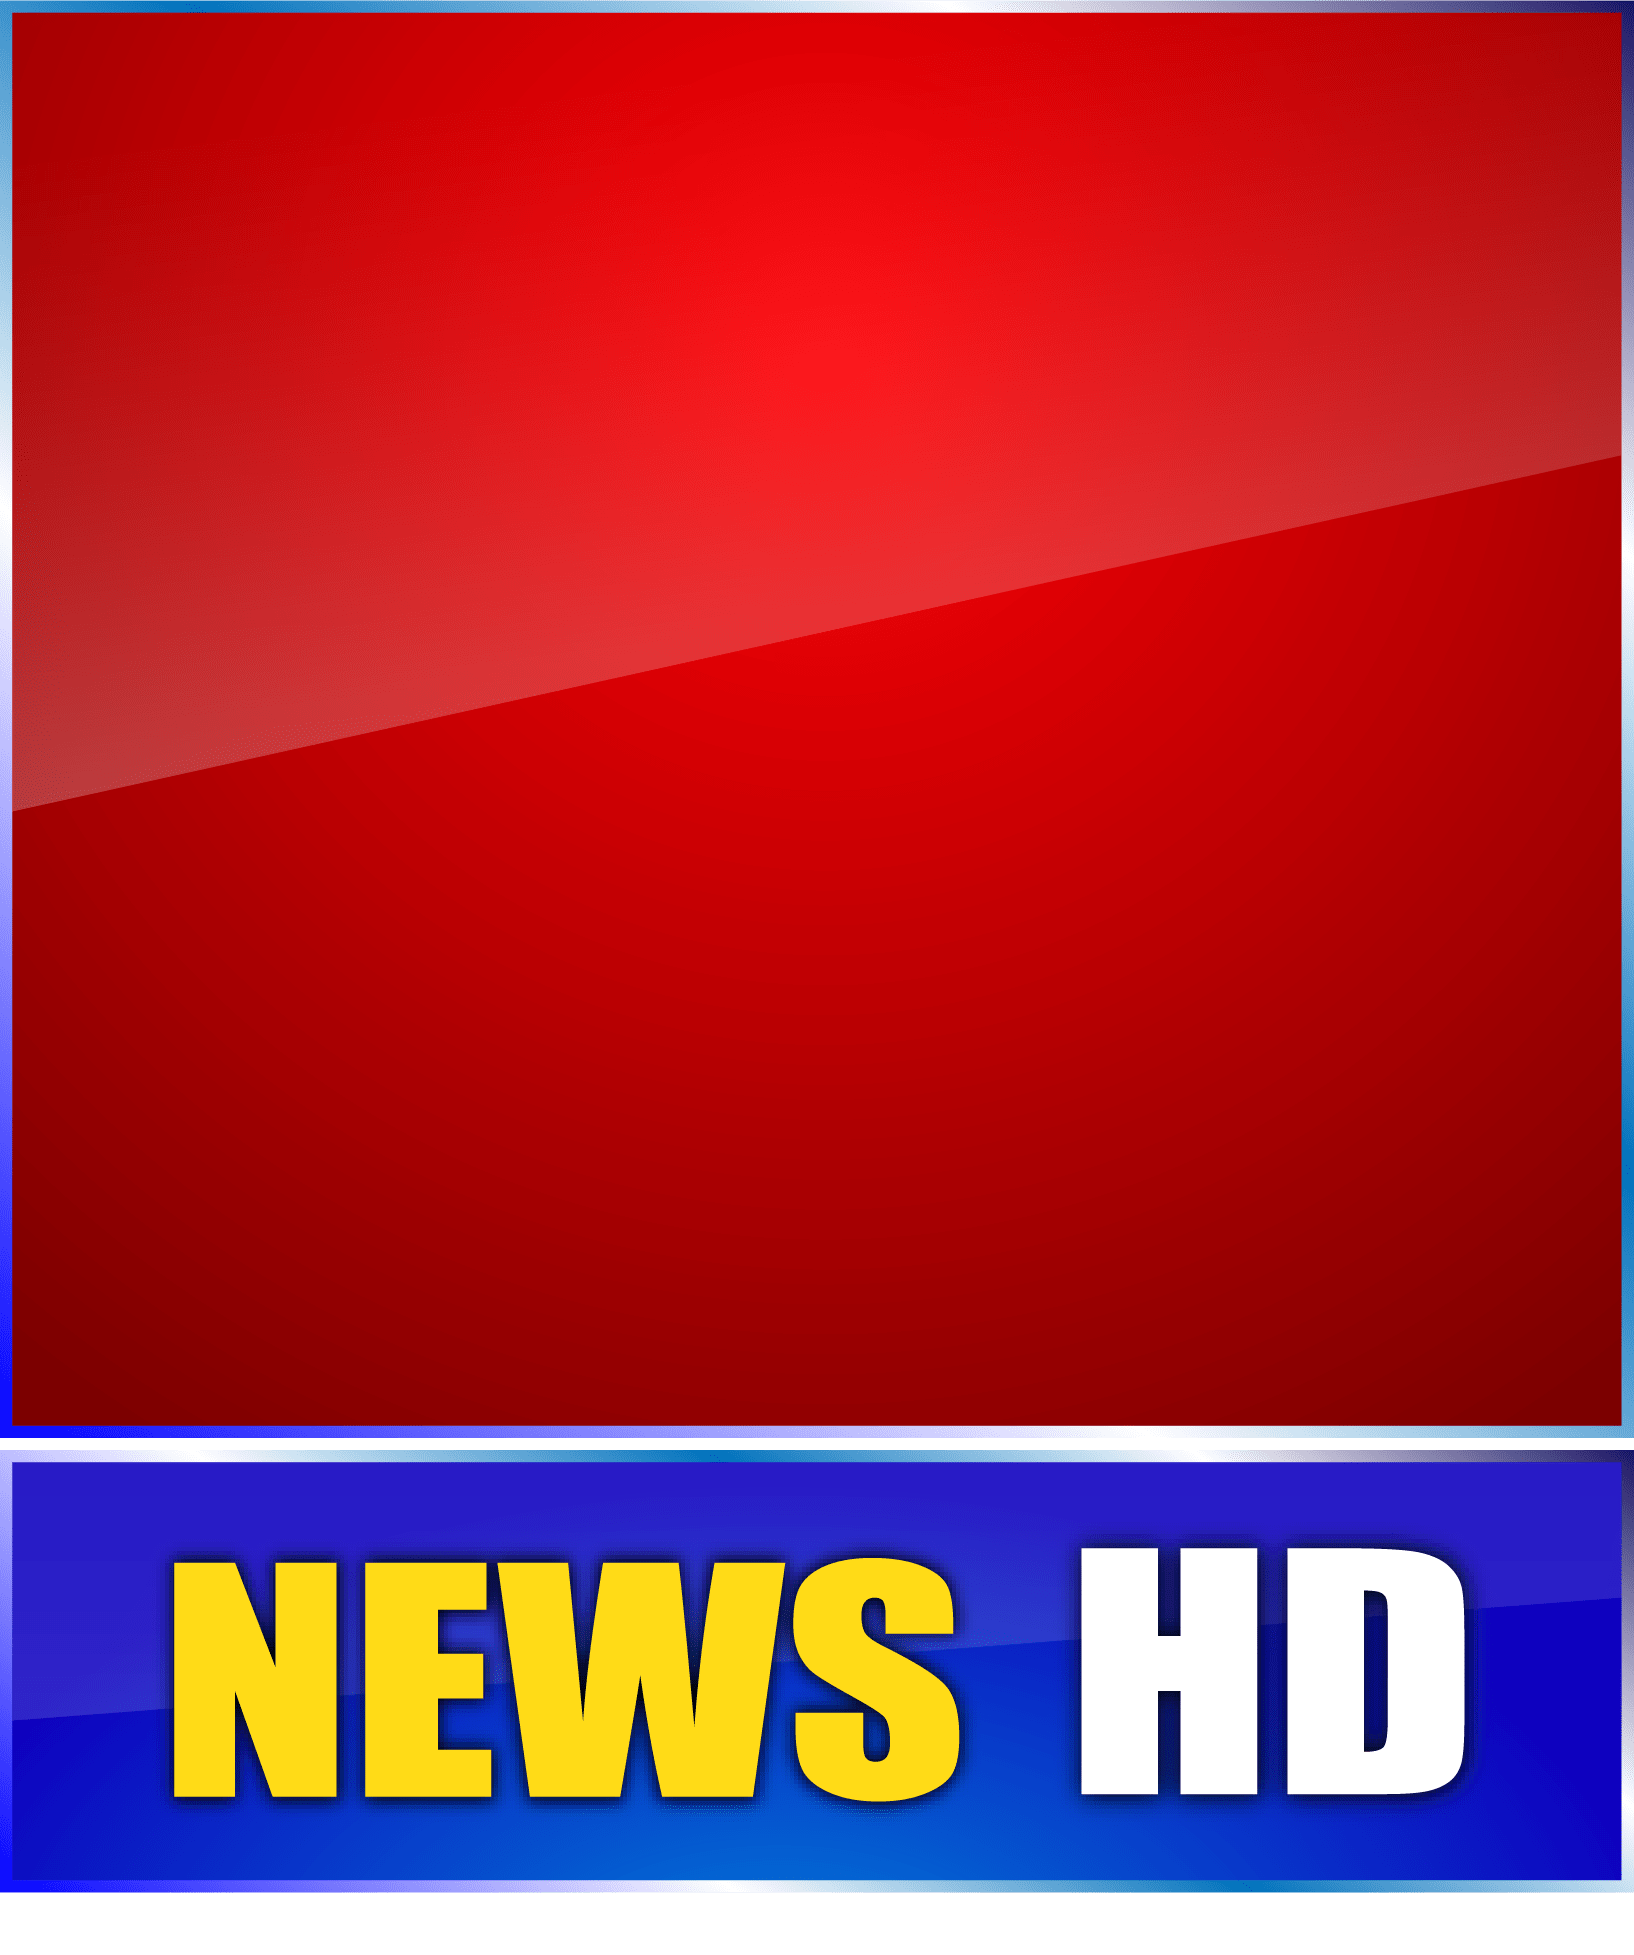 News Channel Logo Background Graphic High Quality TUTORIALS. Channel logo, Logo background, News channels